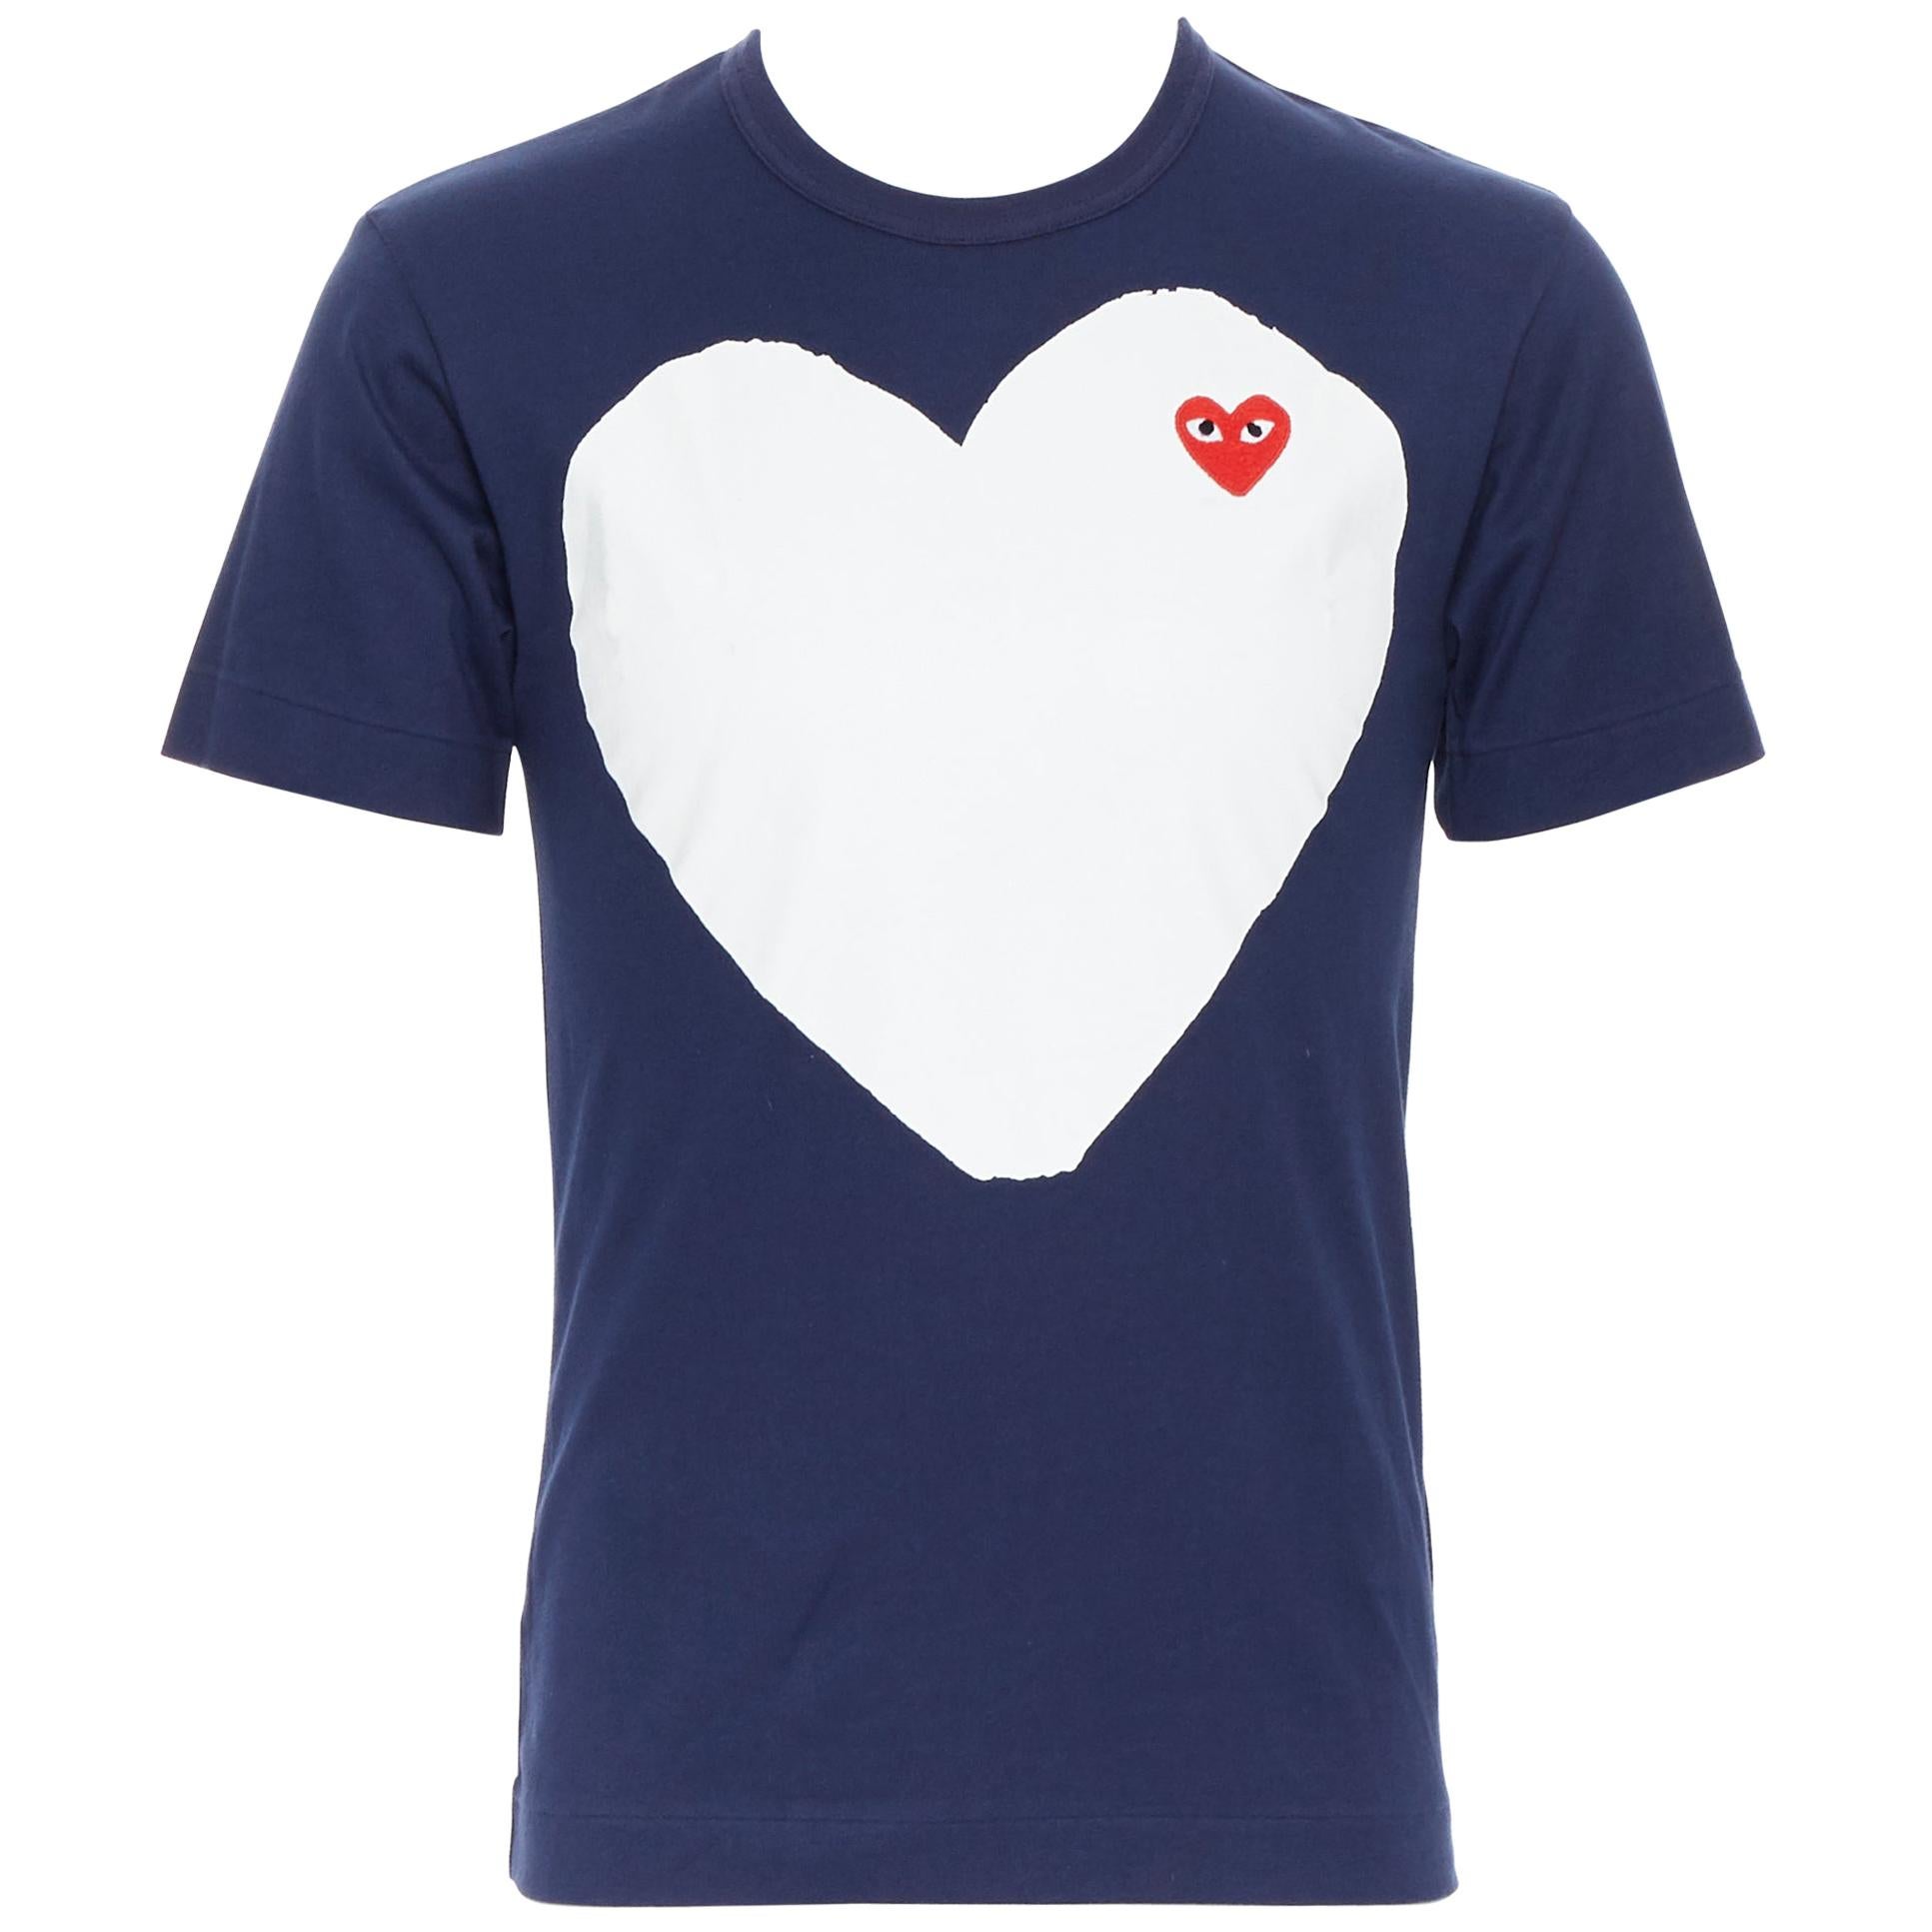 COMME DES GARCONS PLAY navy white heart print short sleeve t-shirt S